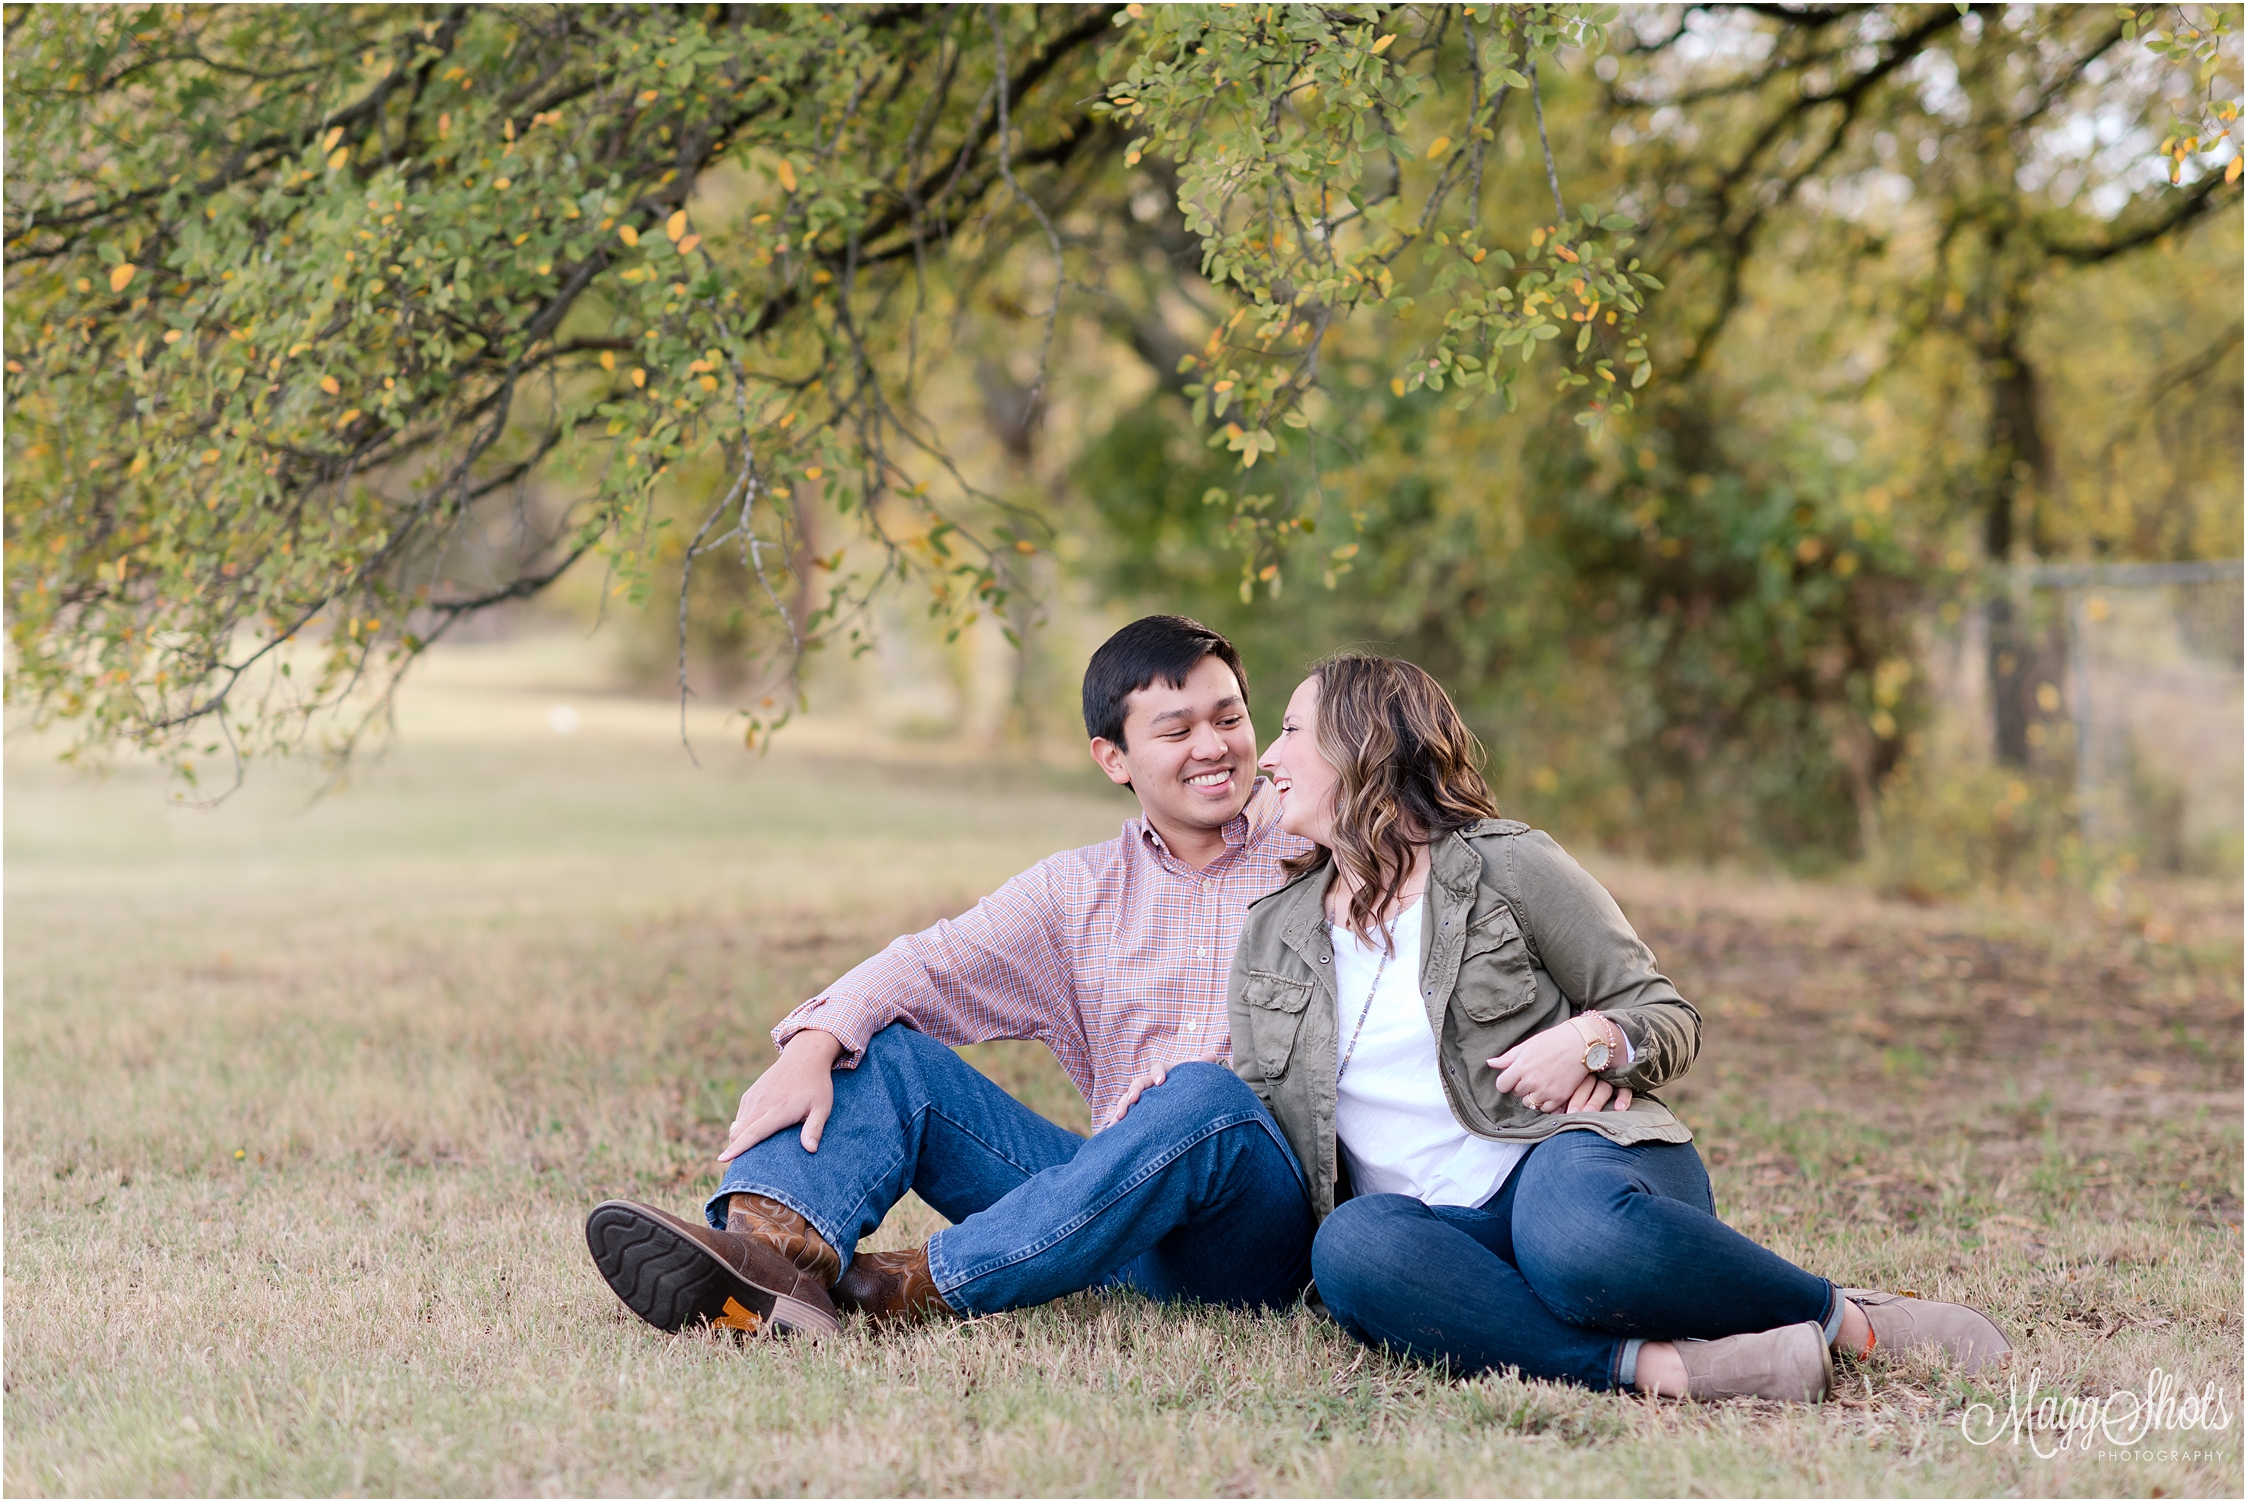 Engagements, Love, Bride and Groom, Green, Engaged, Wedding, MaggShots Photography, MaggShots, Professional Photographer, Porfessional Photography, DFW Wedding Photographer,